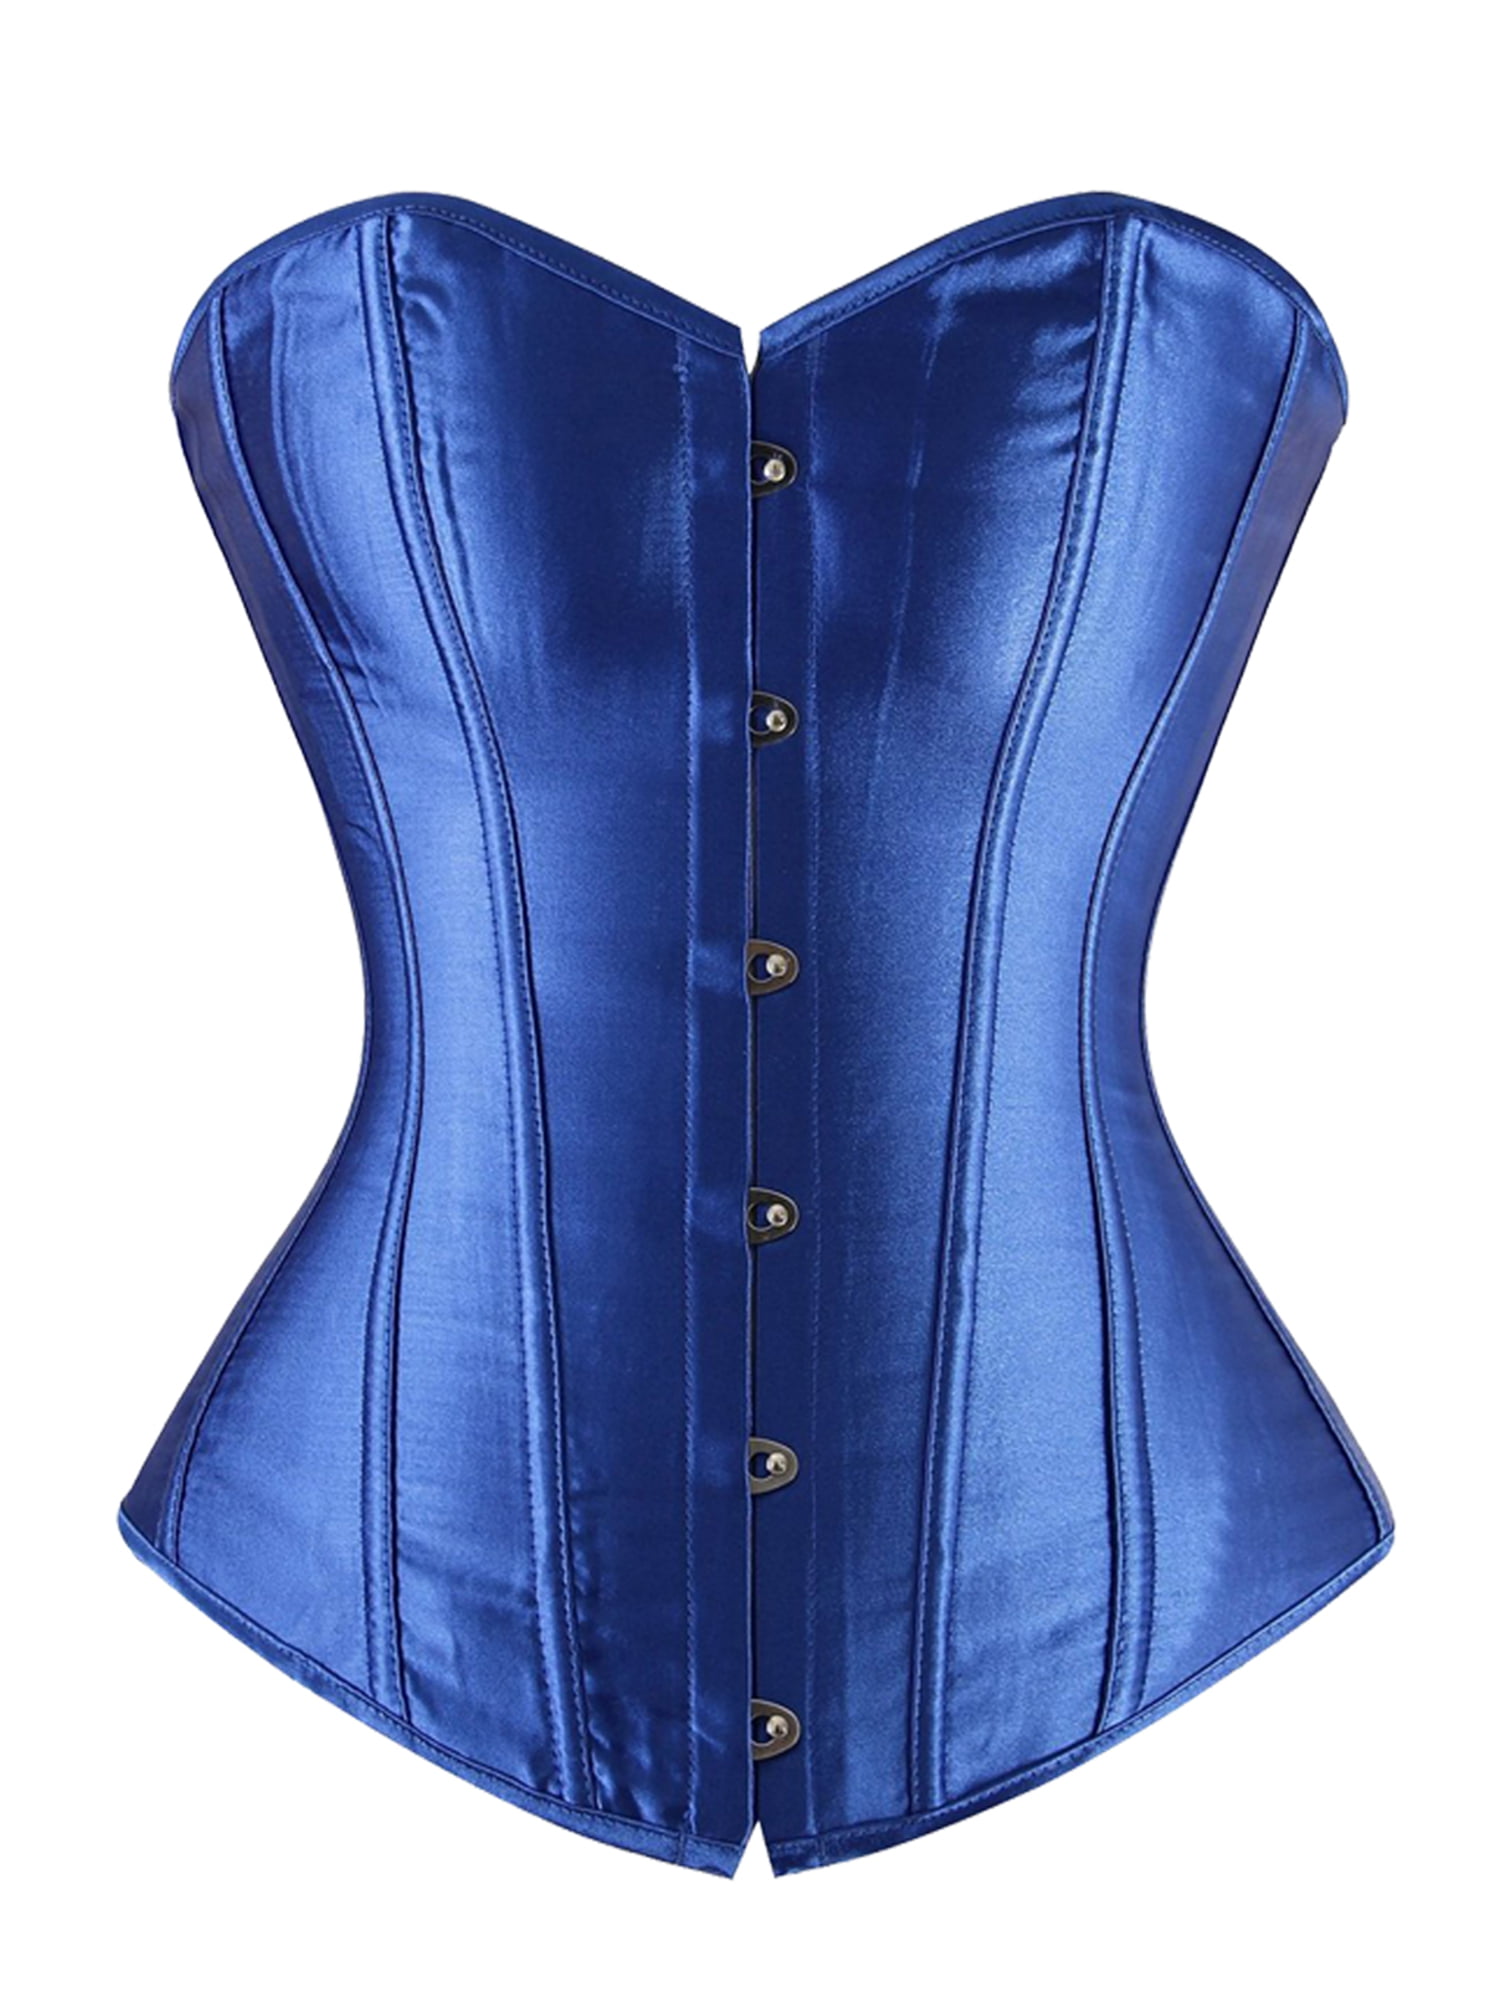 Steel Boned Heavy Duty Waist Training Over Bust Women Leather Corset Womens Basques And Corsets